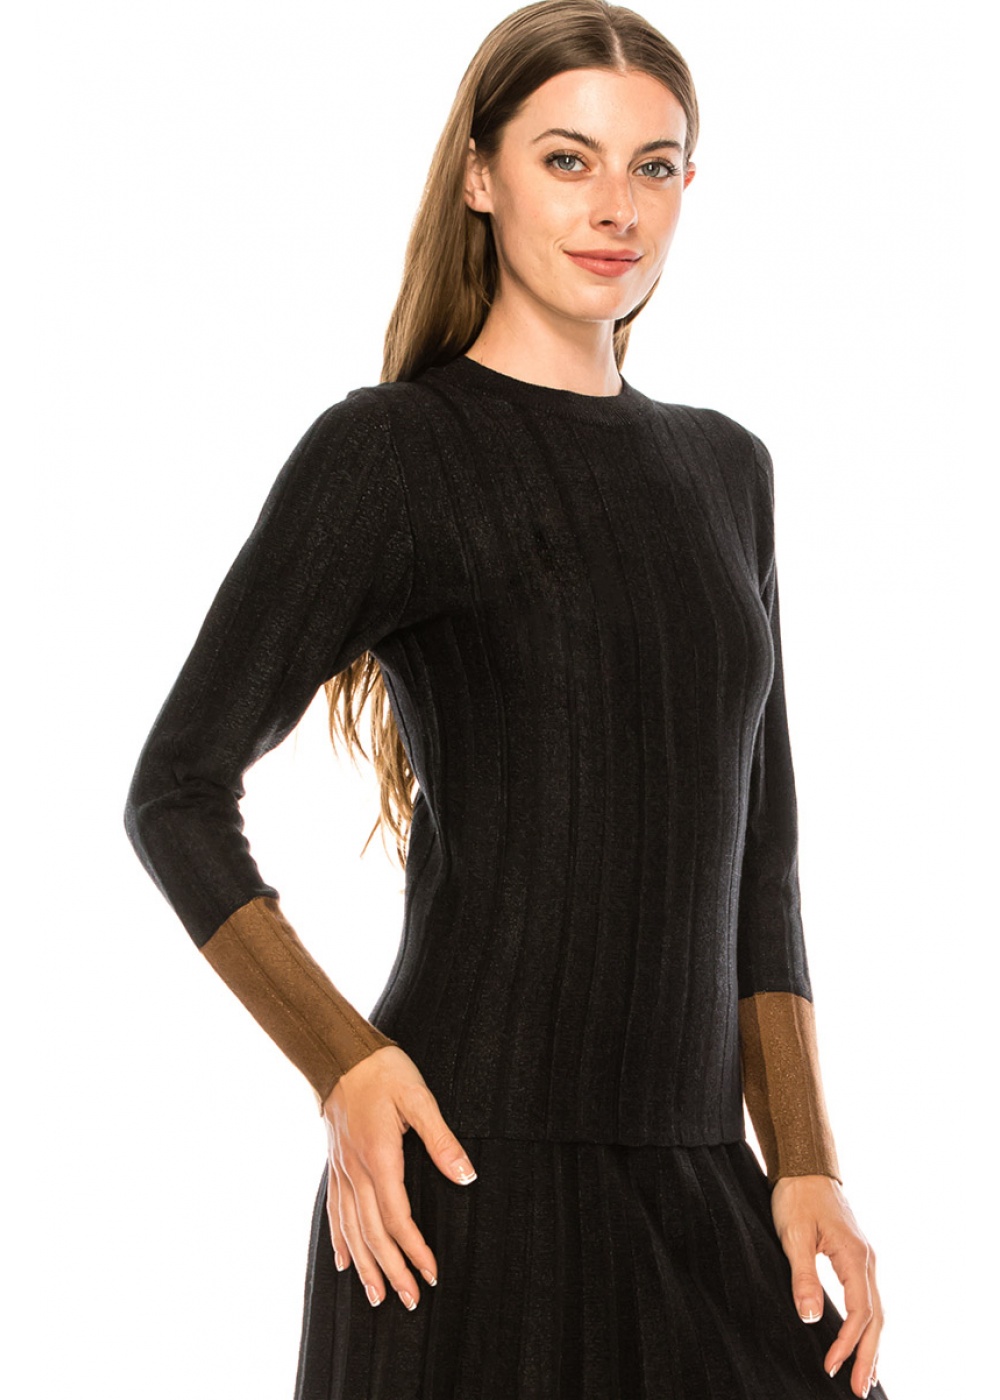 Long Sleeve Black Sweater with brown cuffs